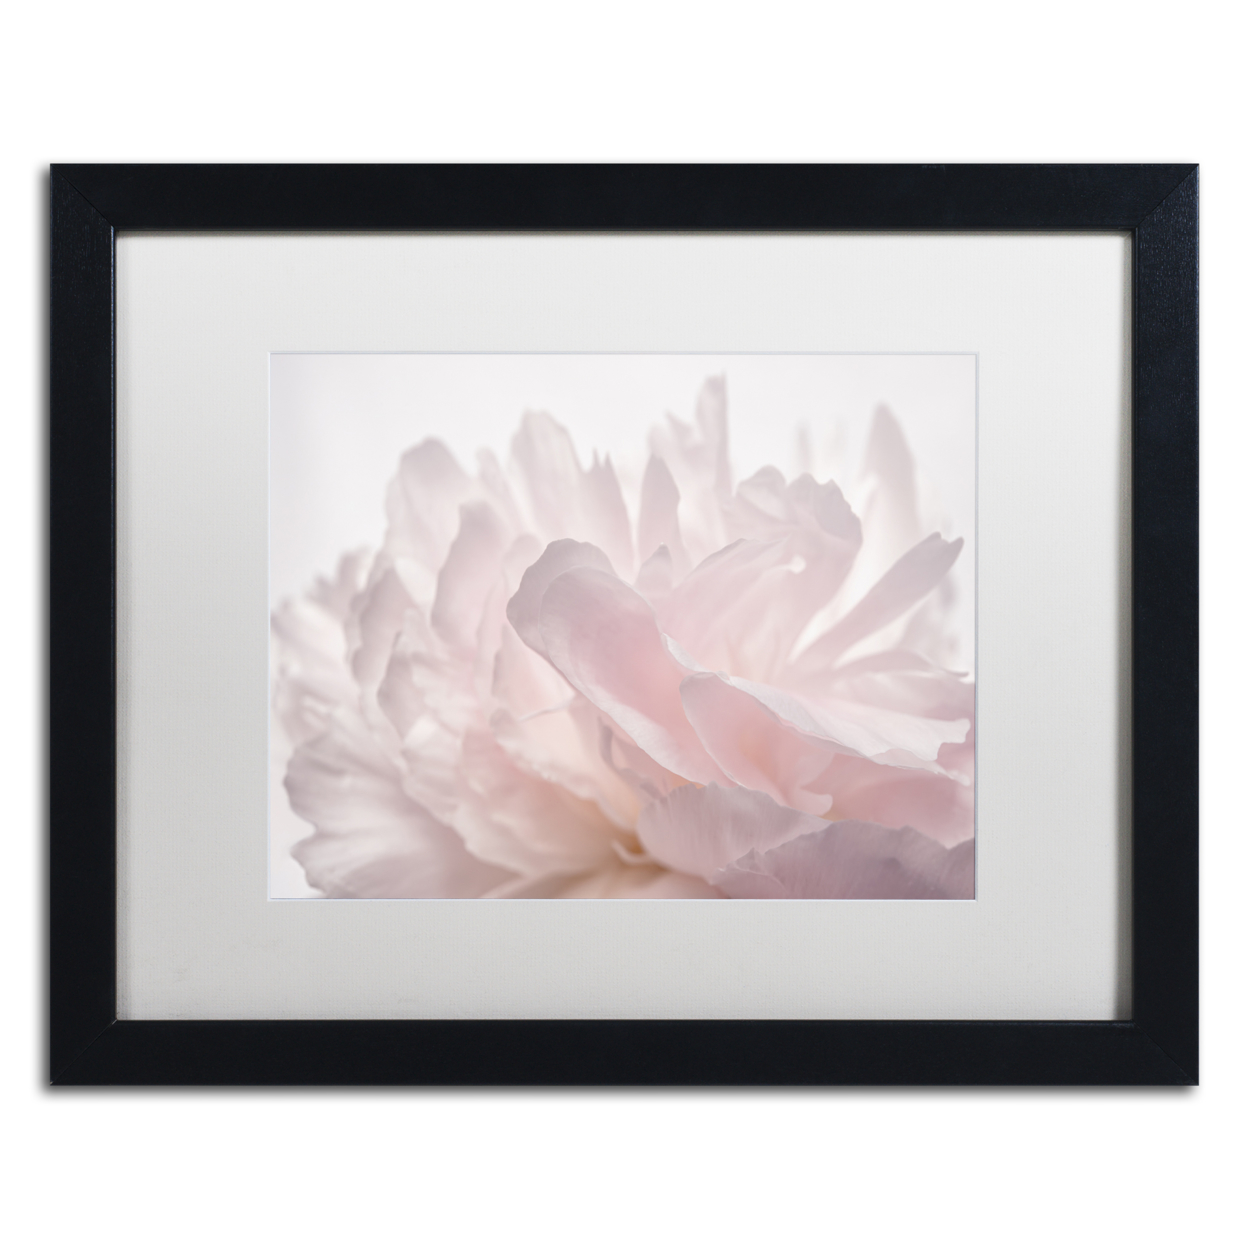 Cora Niele 'Pink Peony Petals V' Black Wooden Framed Art 18 X 22 Inches